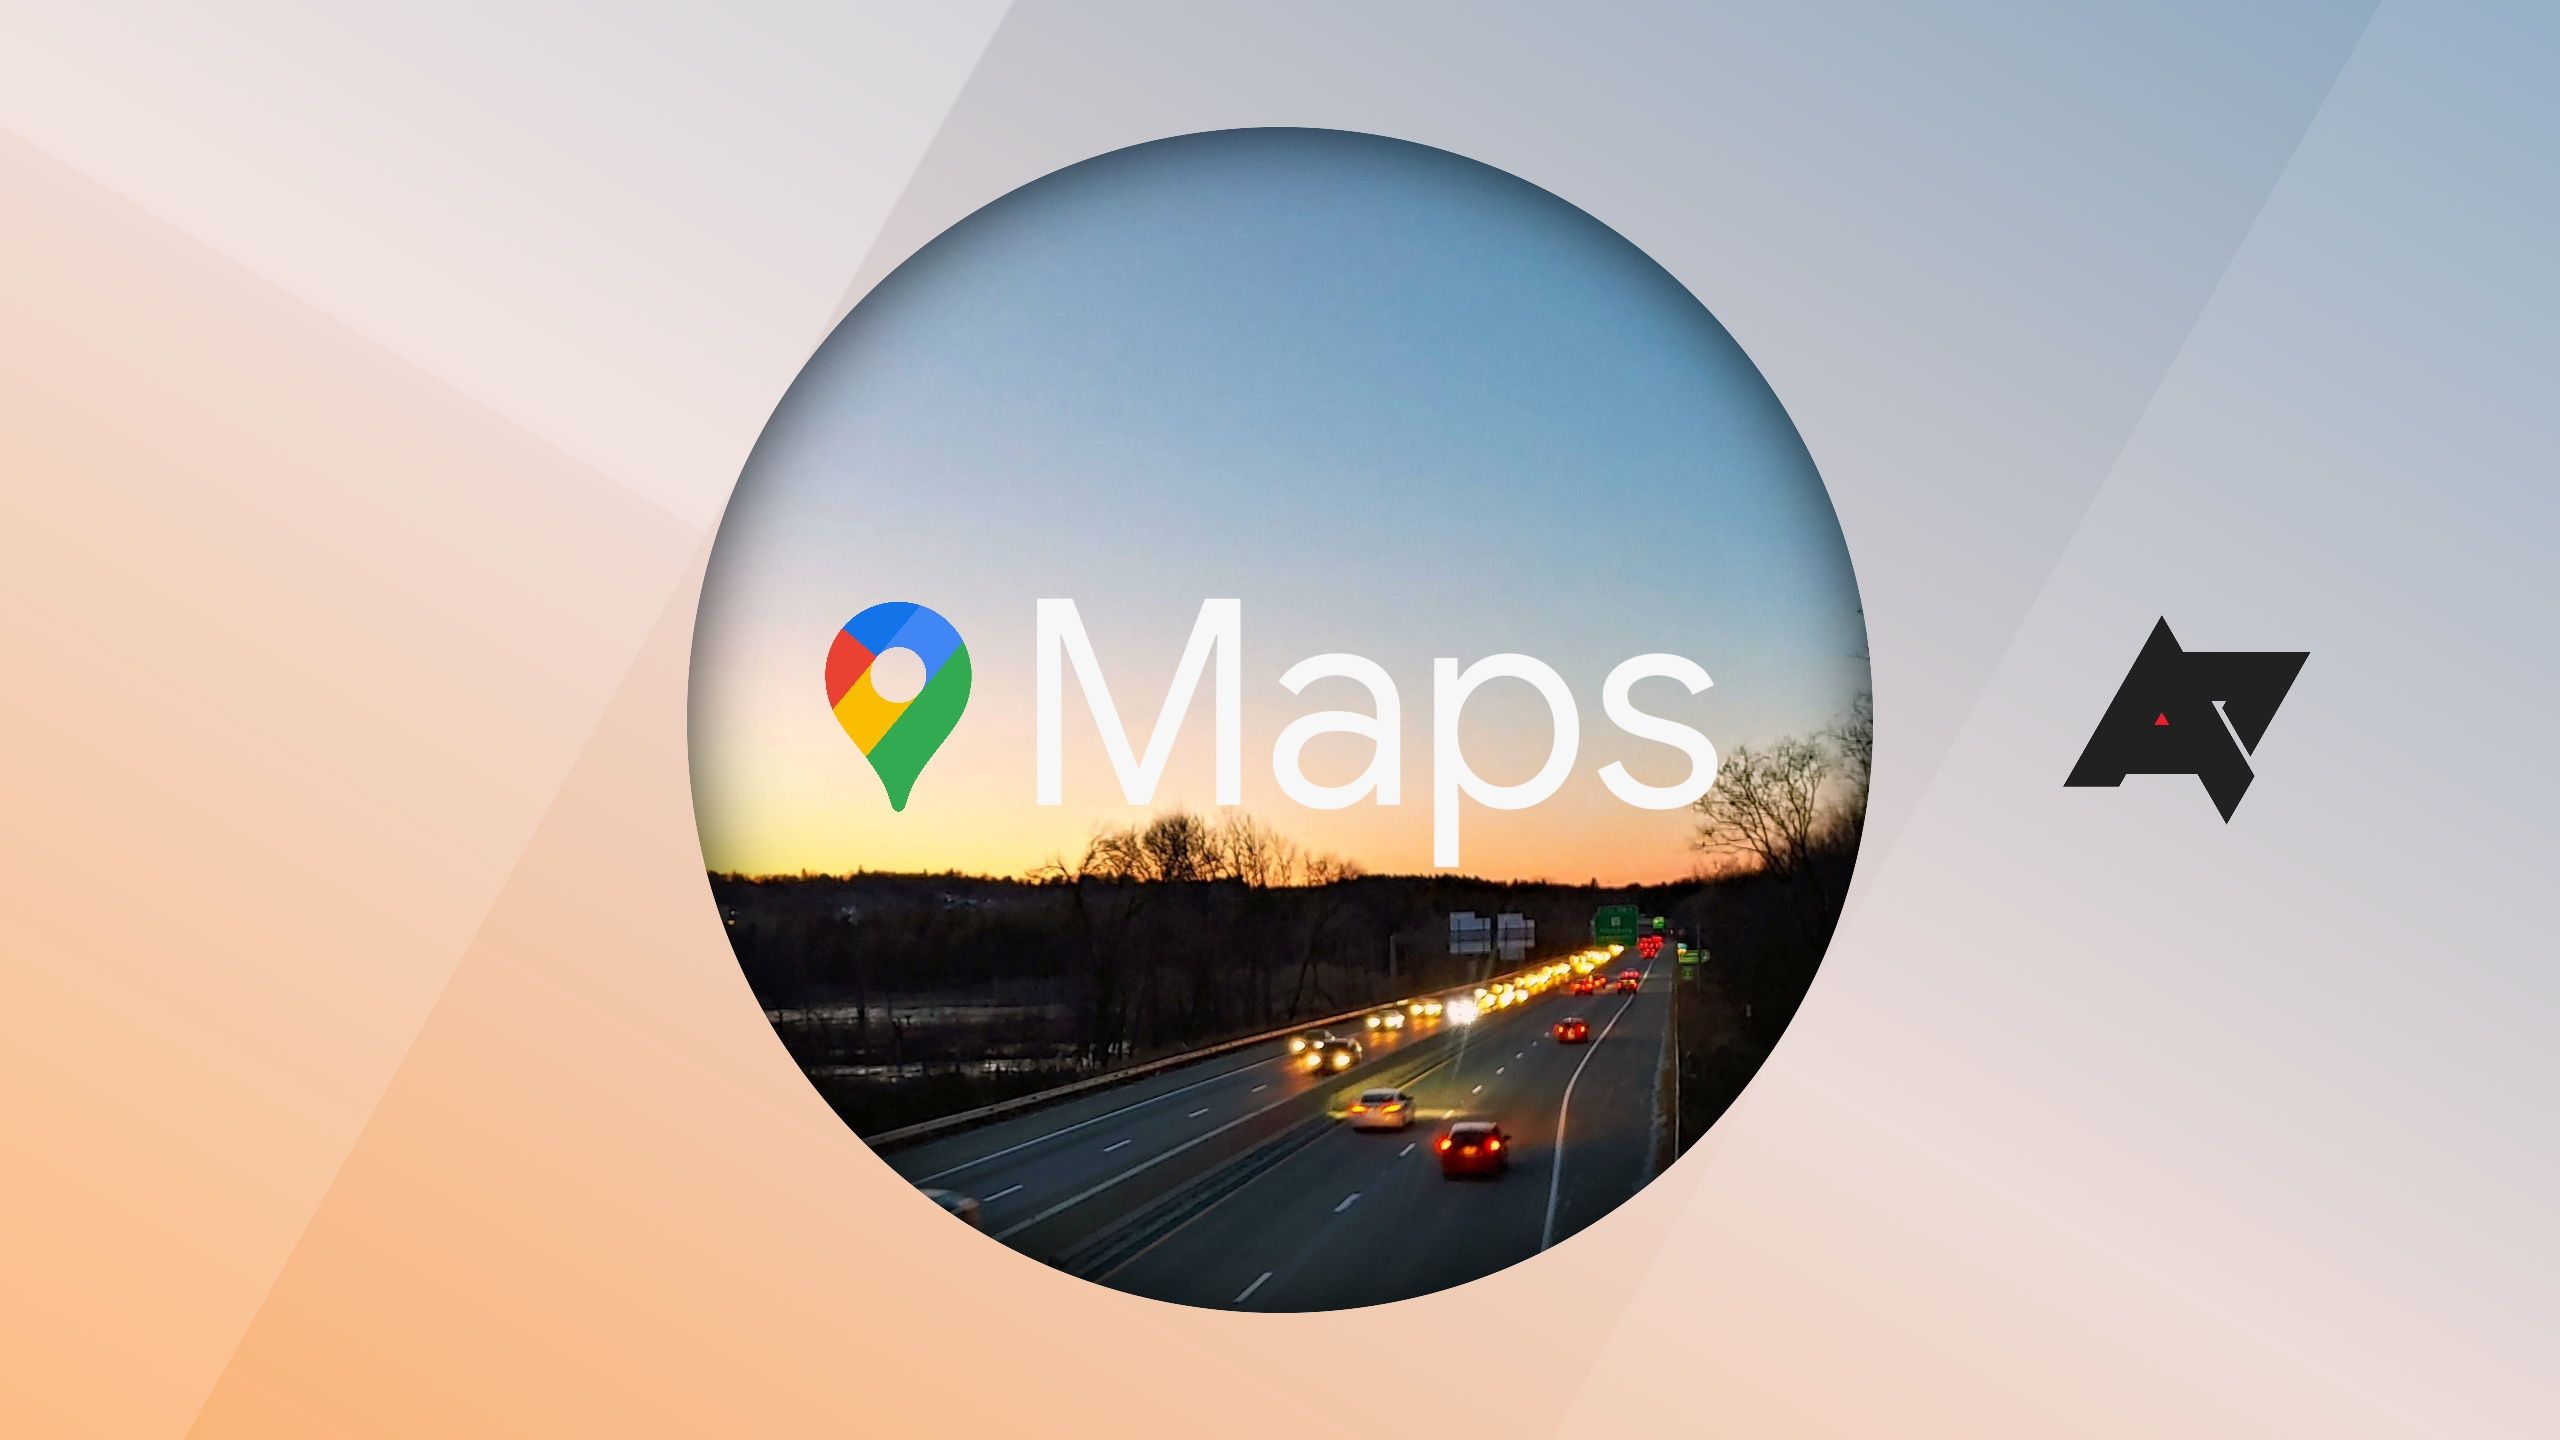 Gemini now automatically starts Google Maps navigation when asking for directions